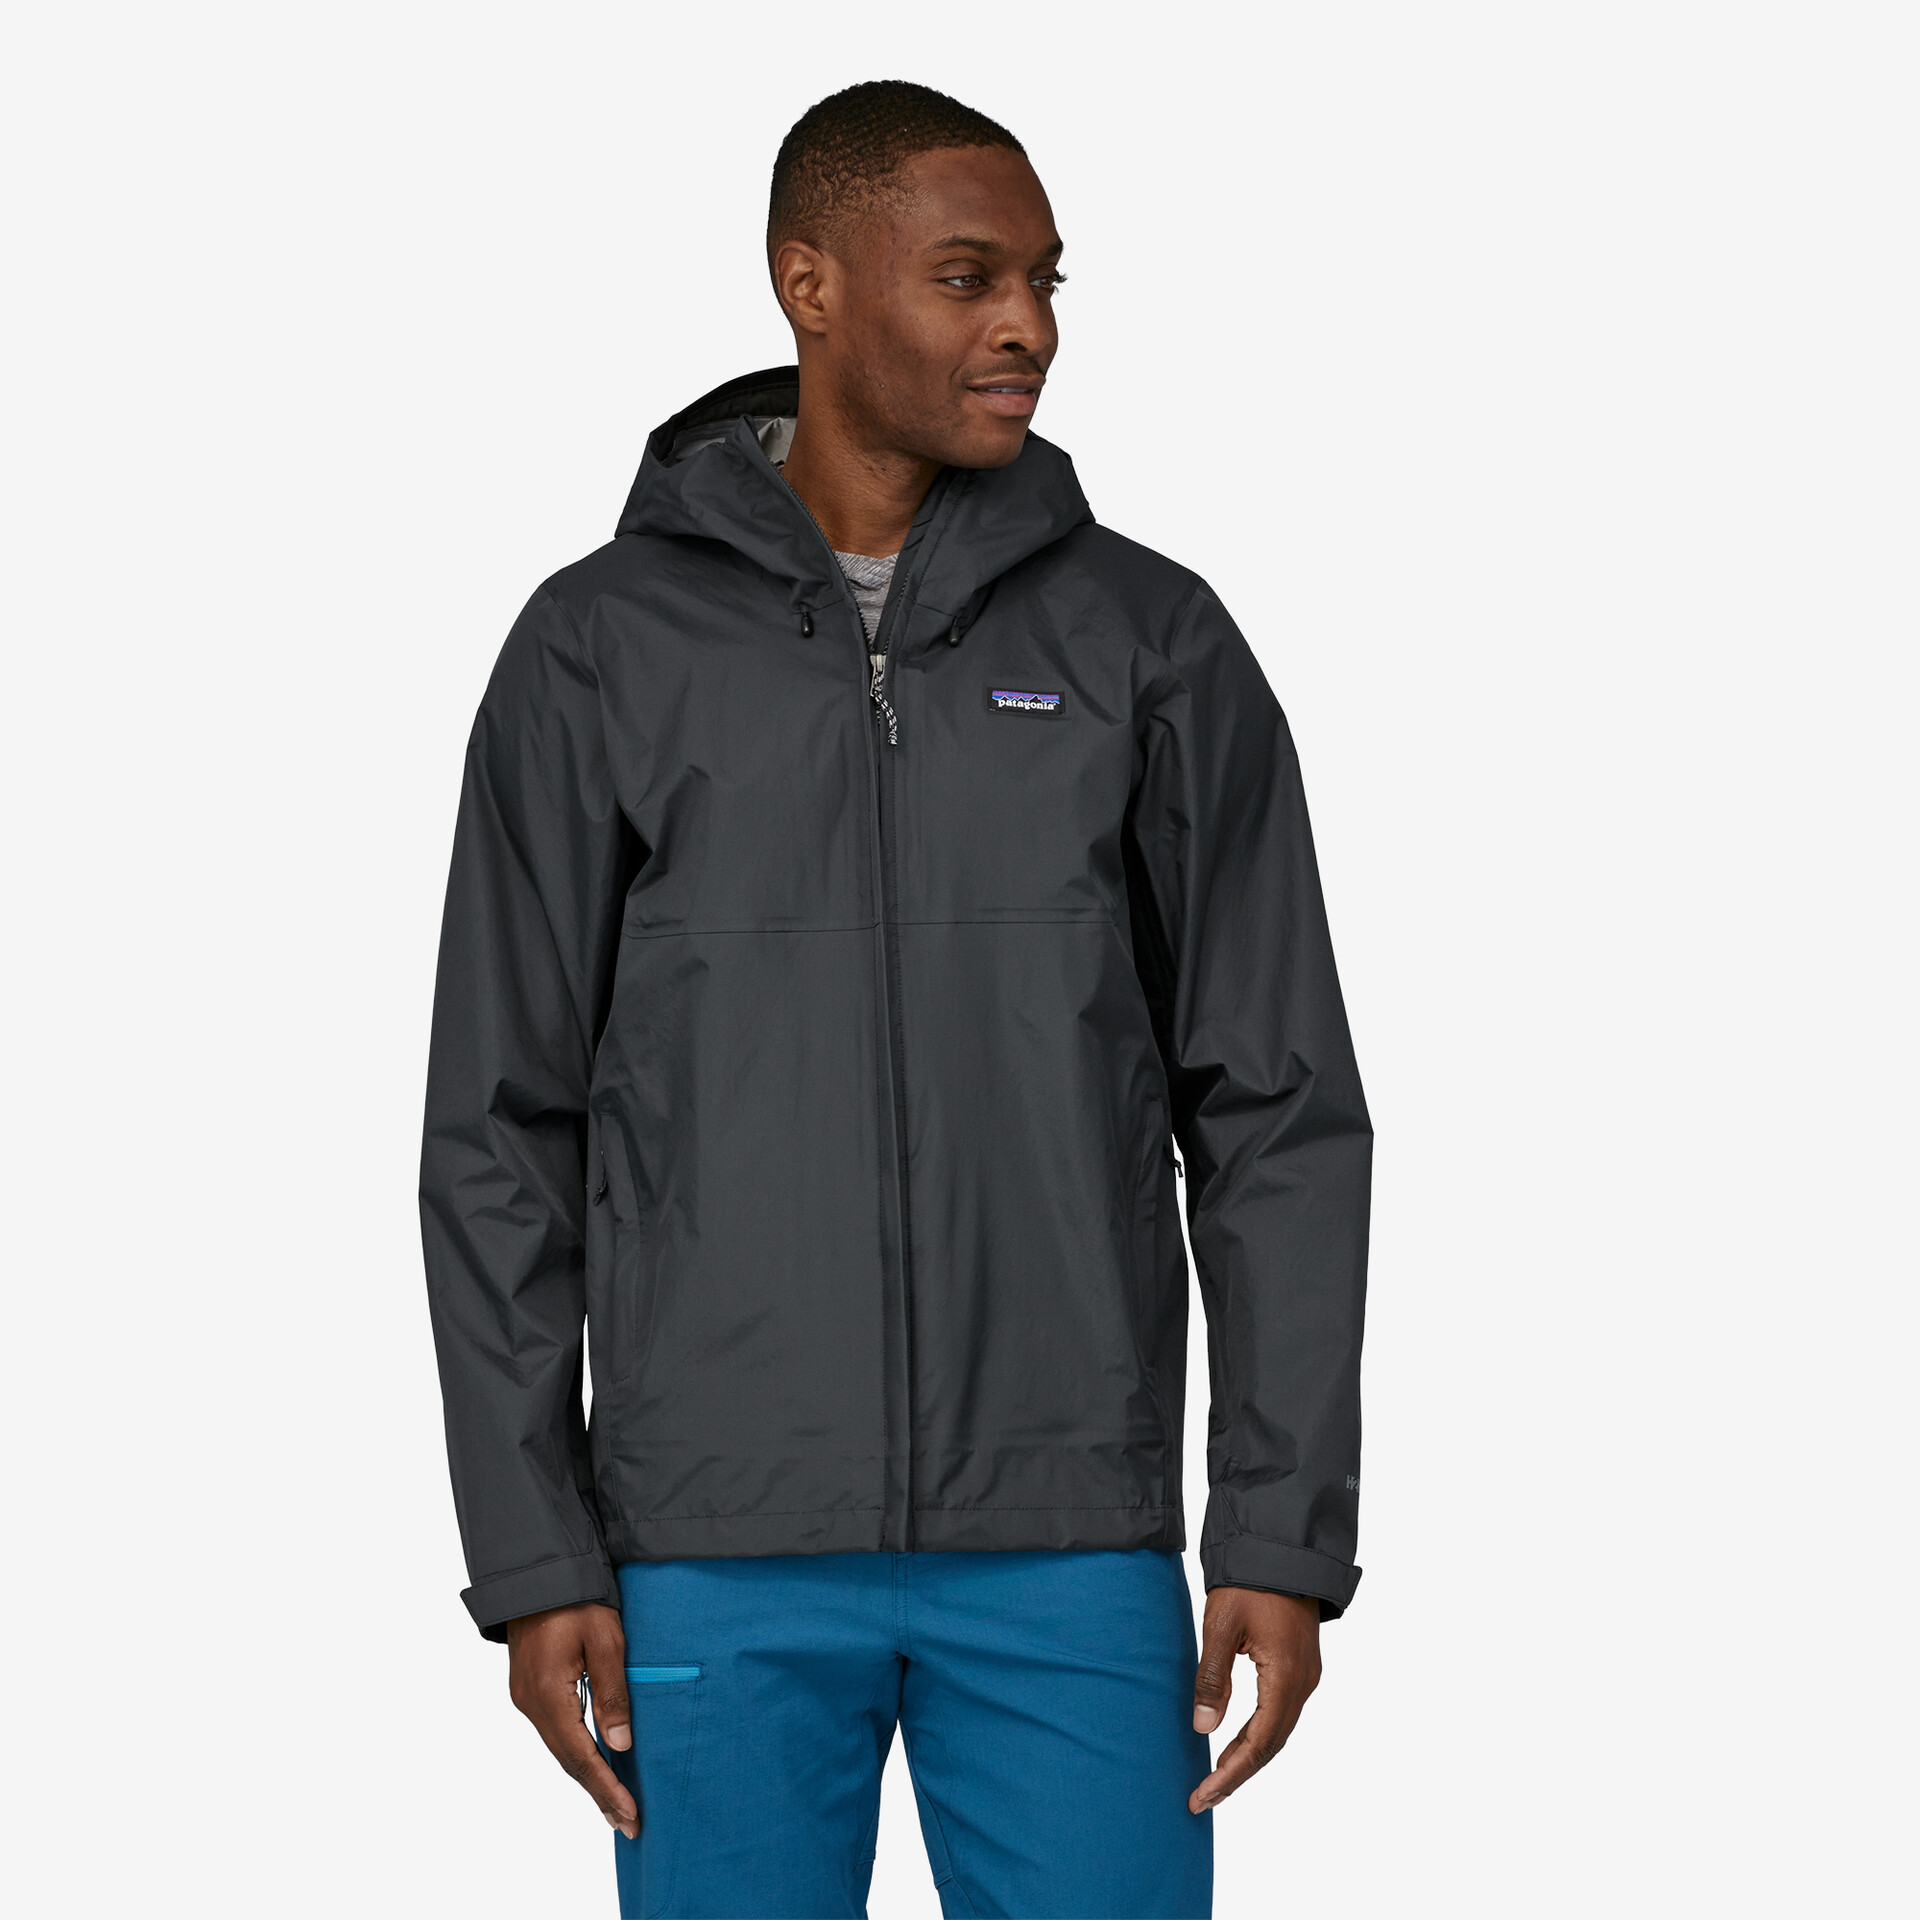 Torrentshell 3L Rain Jacket by Patagonia, eco-friendly and waterproof for all-day comfort.